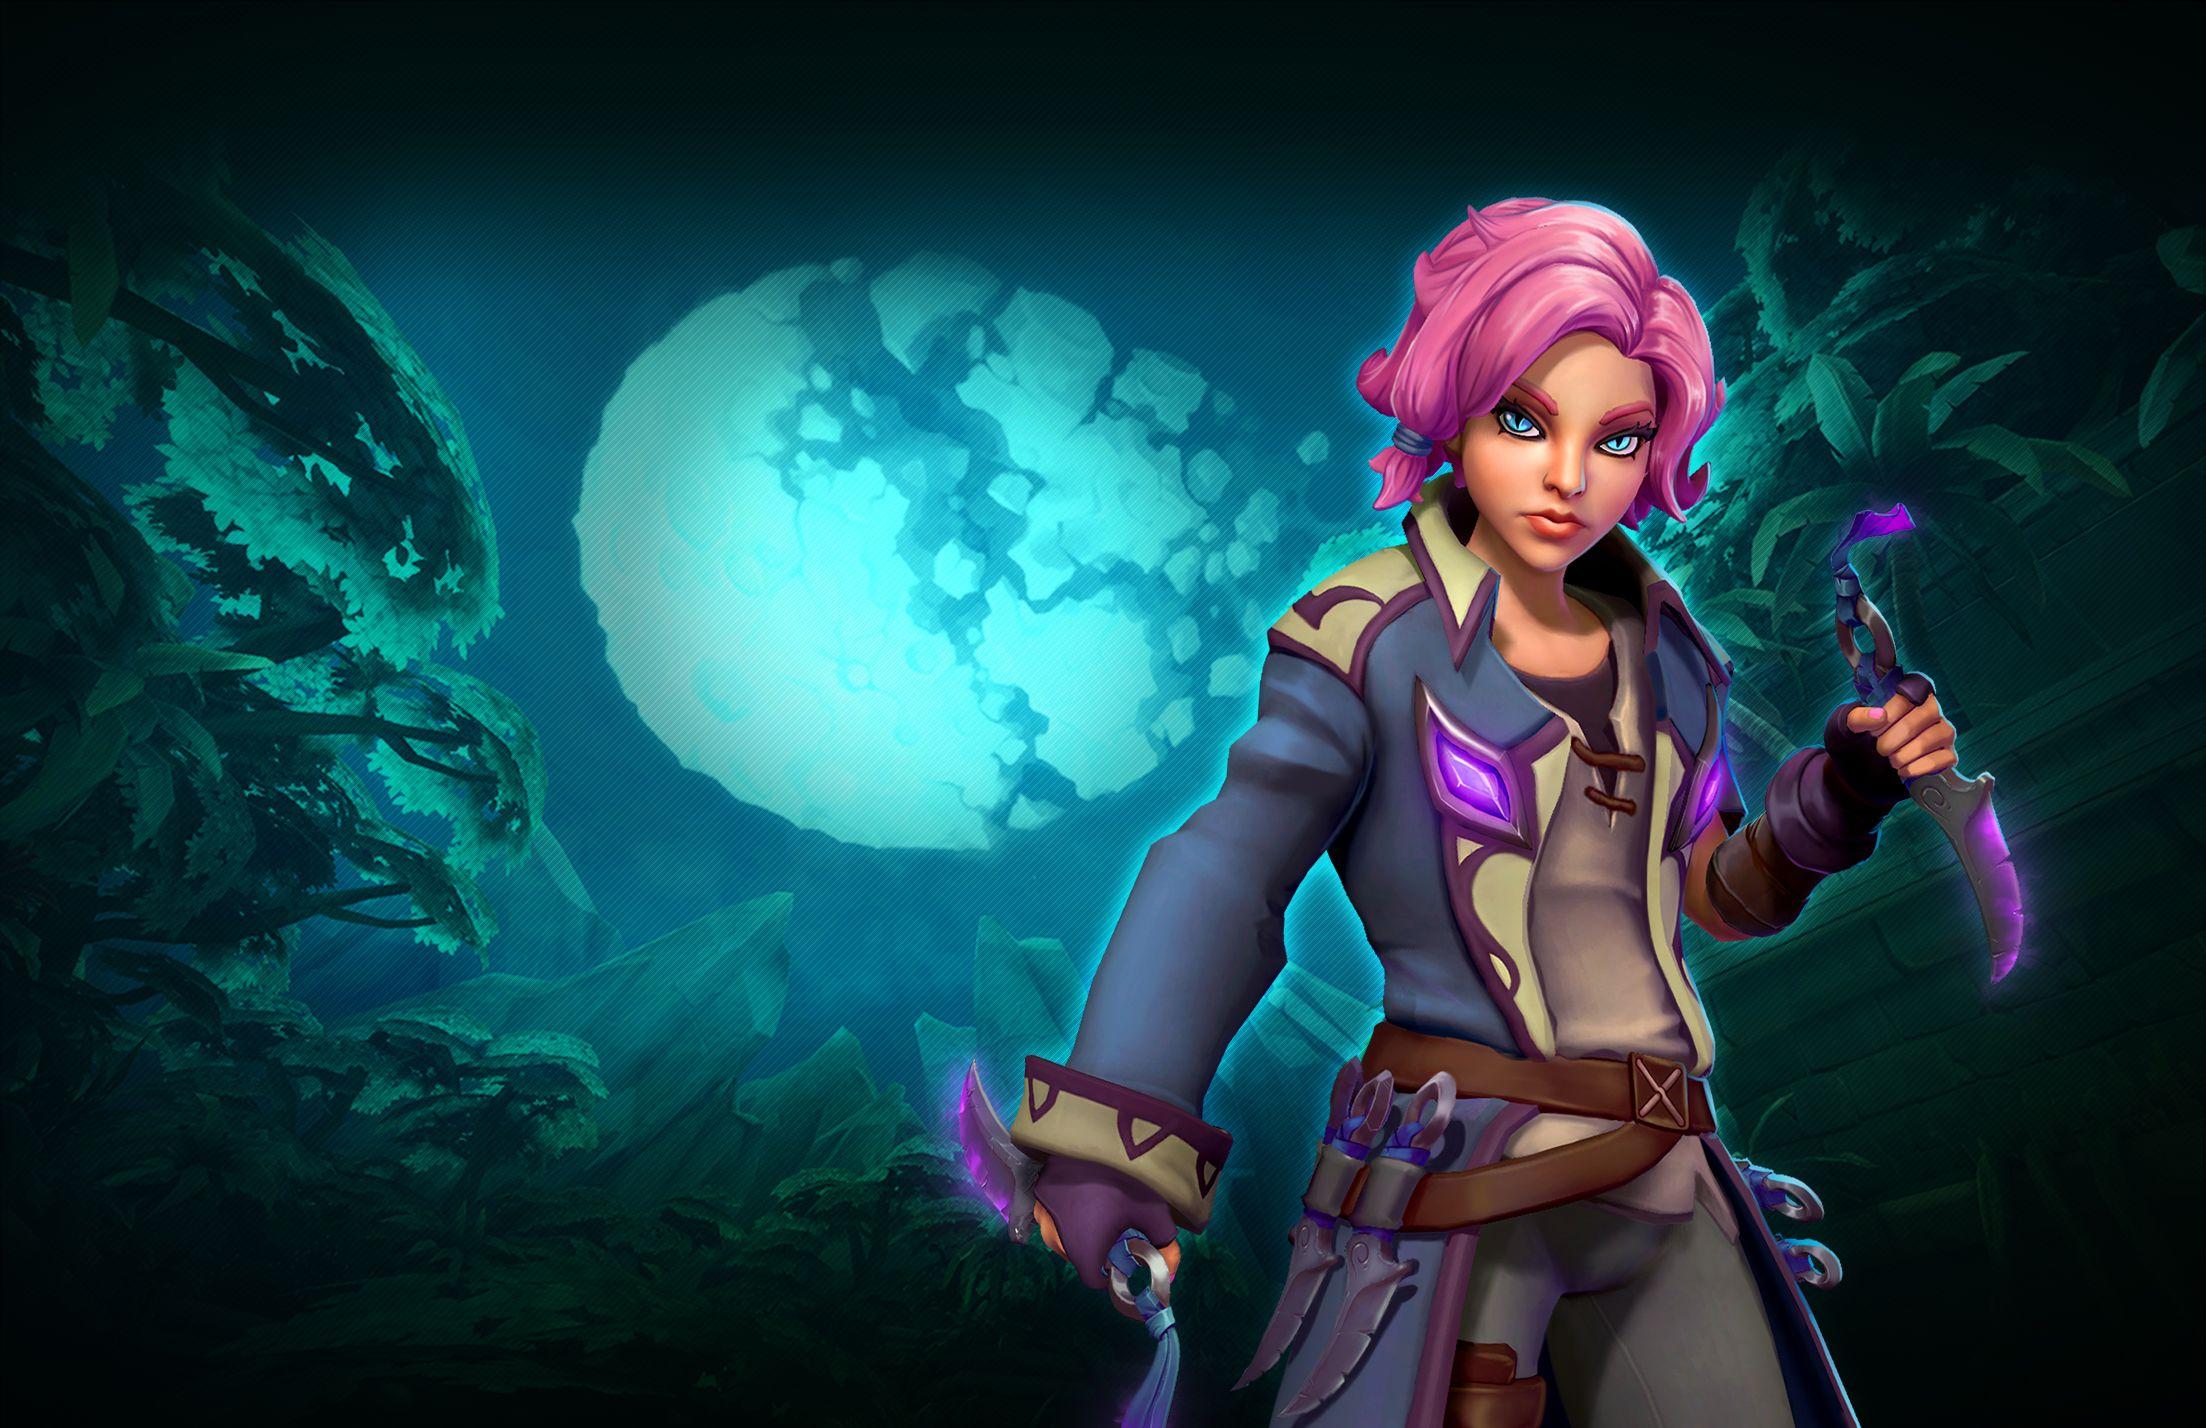 New Champion Maeve & Valentine's Themed Items Arrive for Paladins